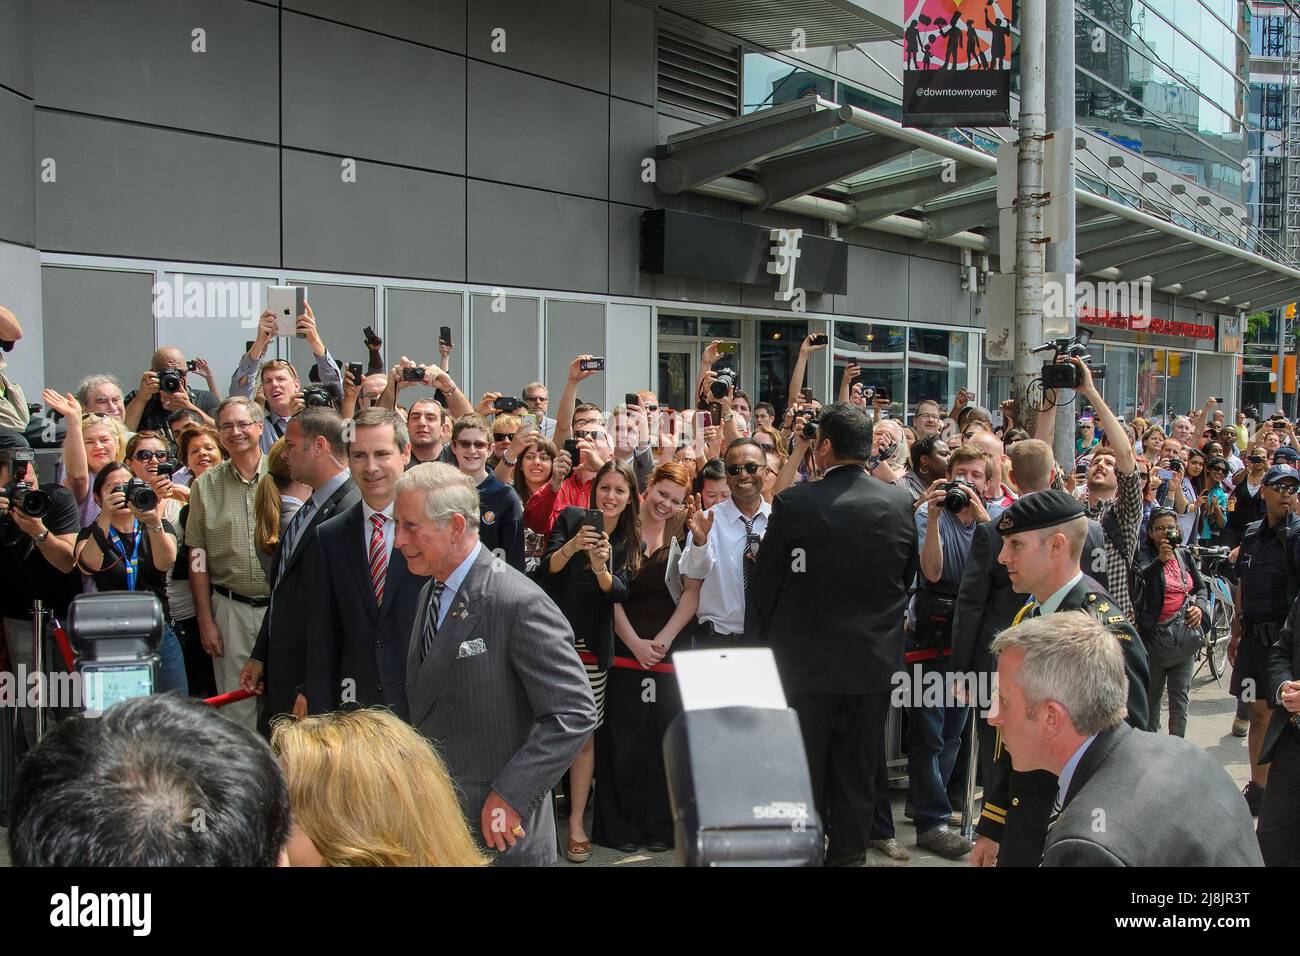 Toronto, Canada - May 22, 2012: Prince Charles visit Ryerson University. The visit was part of the Queen's Diamond Jubilee celebrations. Stock Photo